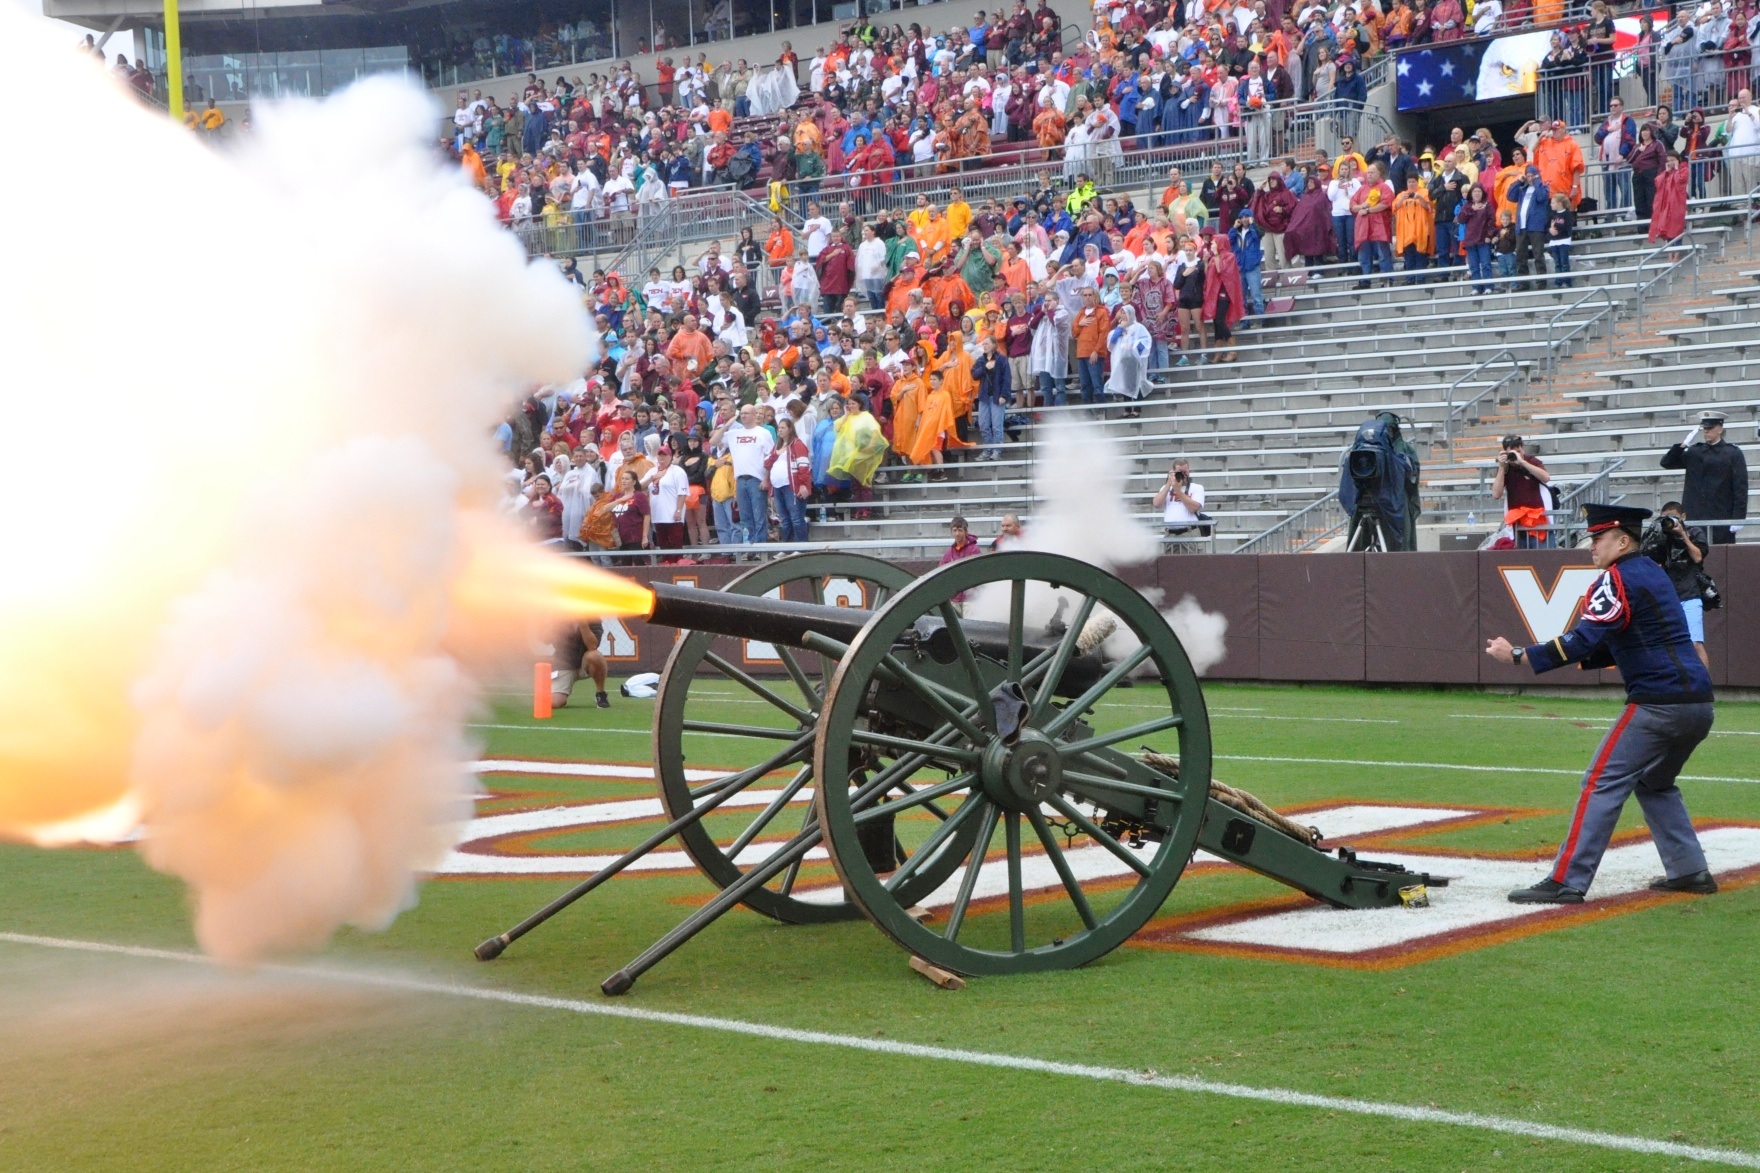 Skipper, the Virginia Tech Corps of Cadets cannon, firing during the National Anthem at a football game